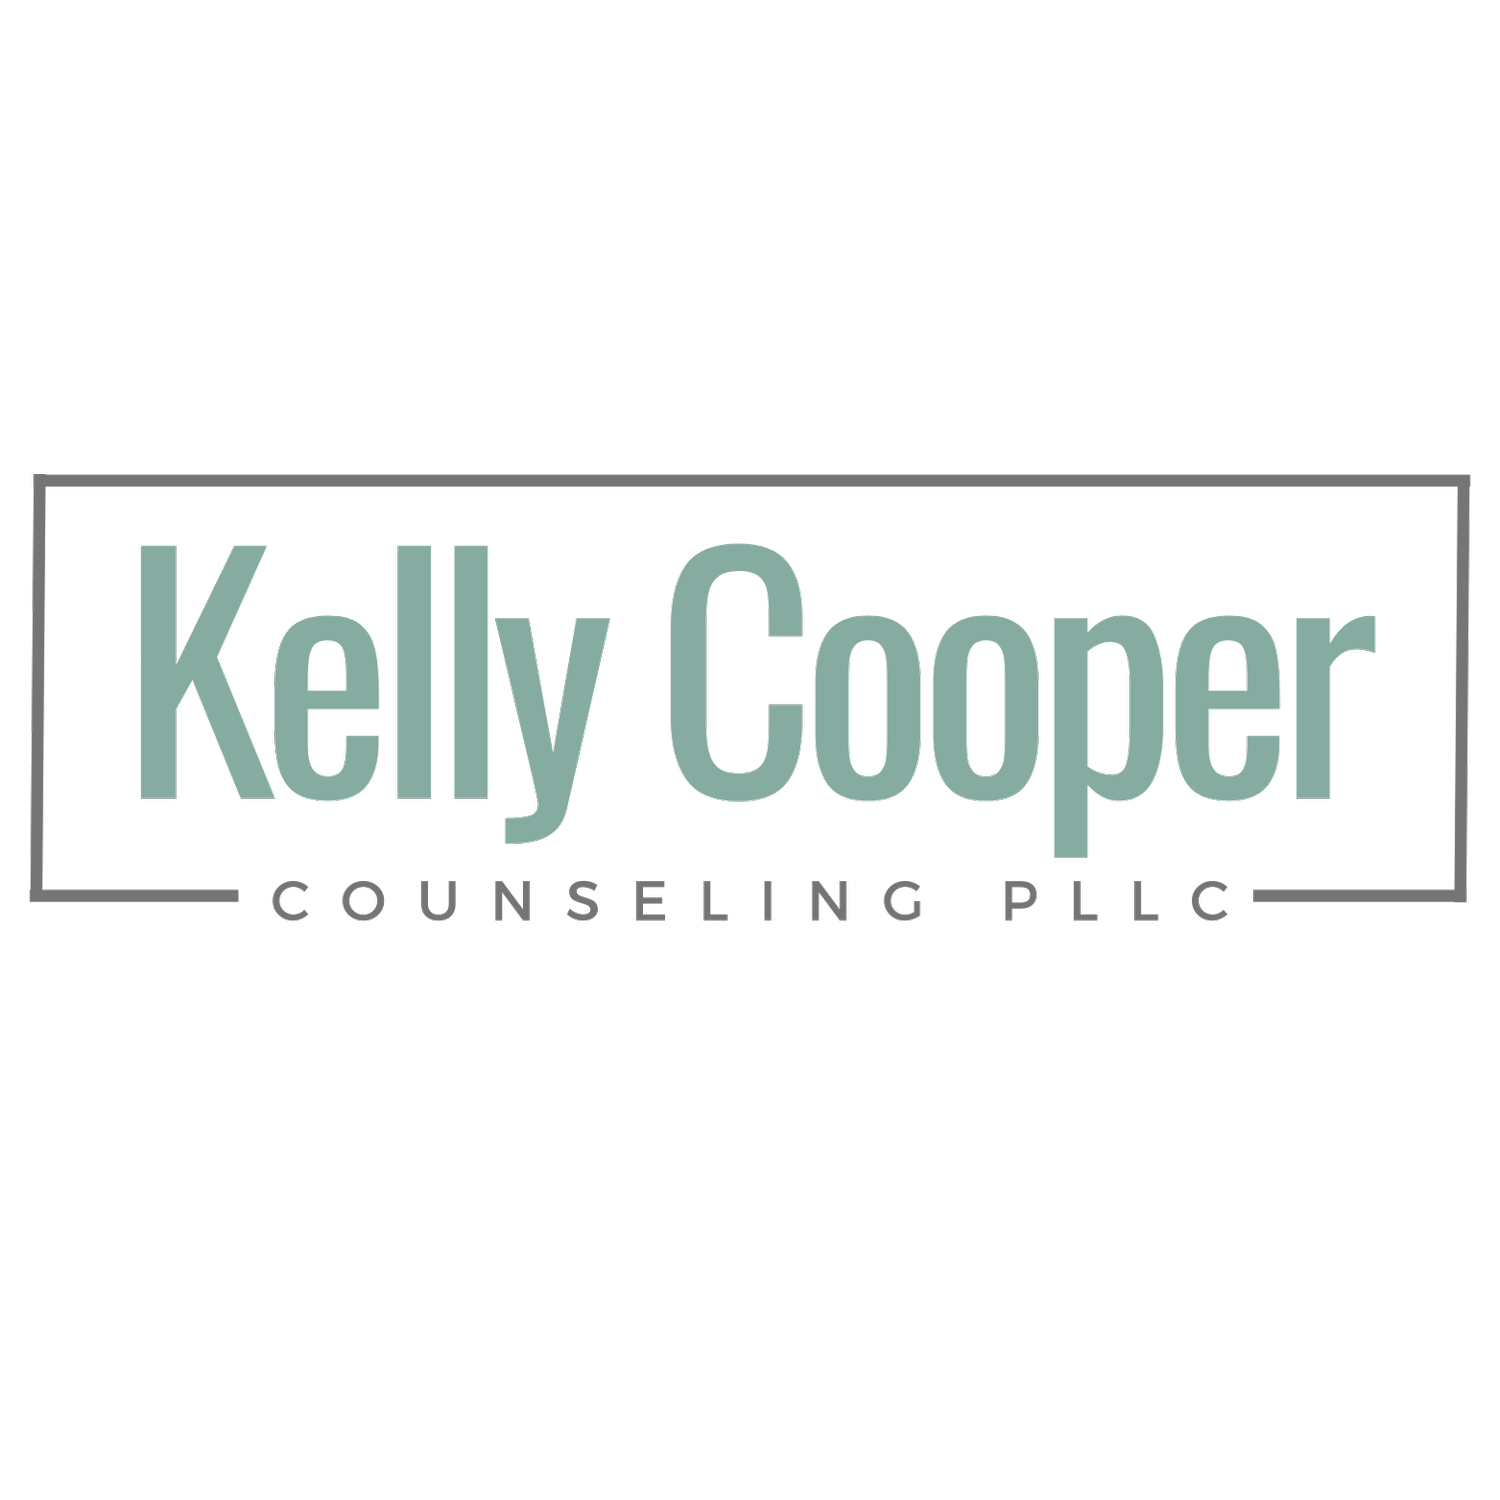 Kelly Cooper Counseling PLLC